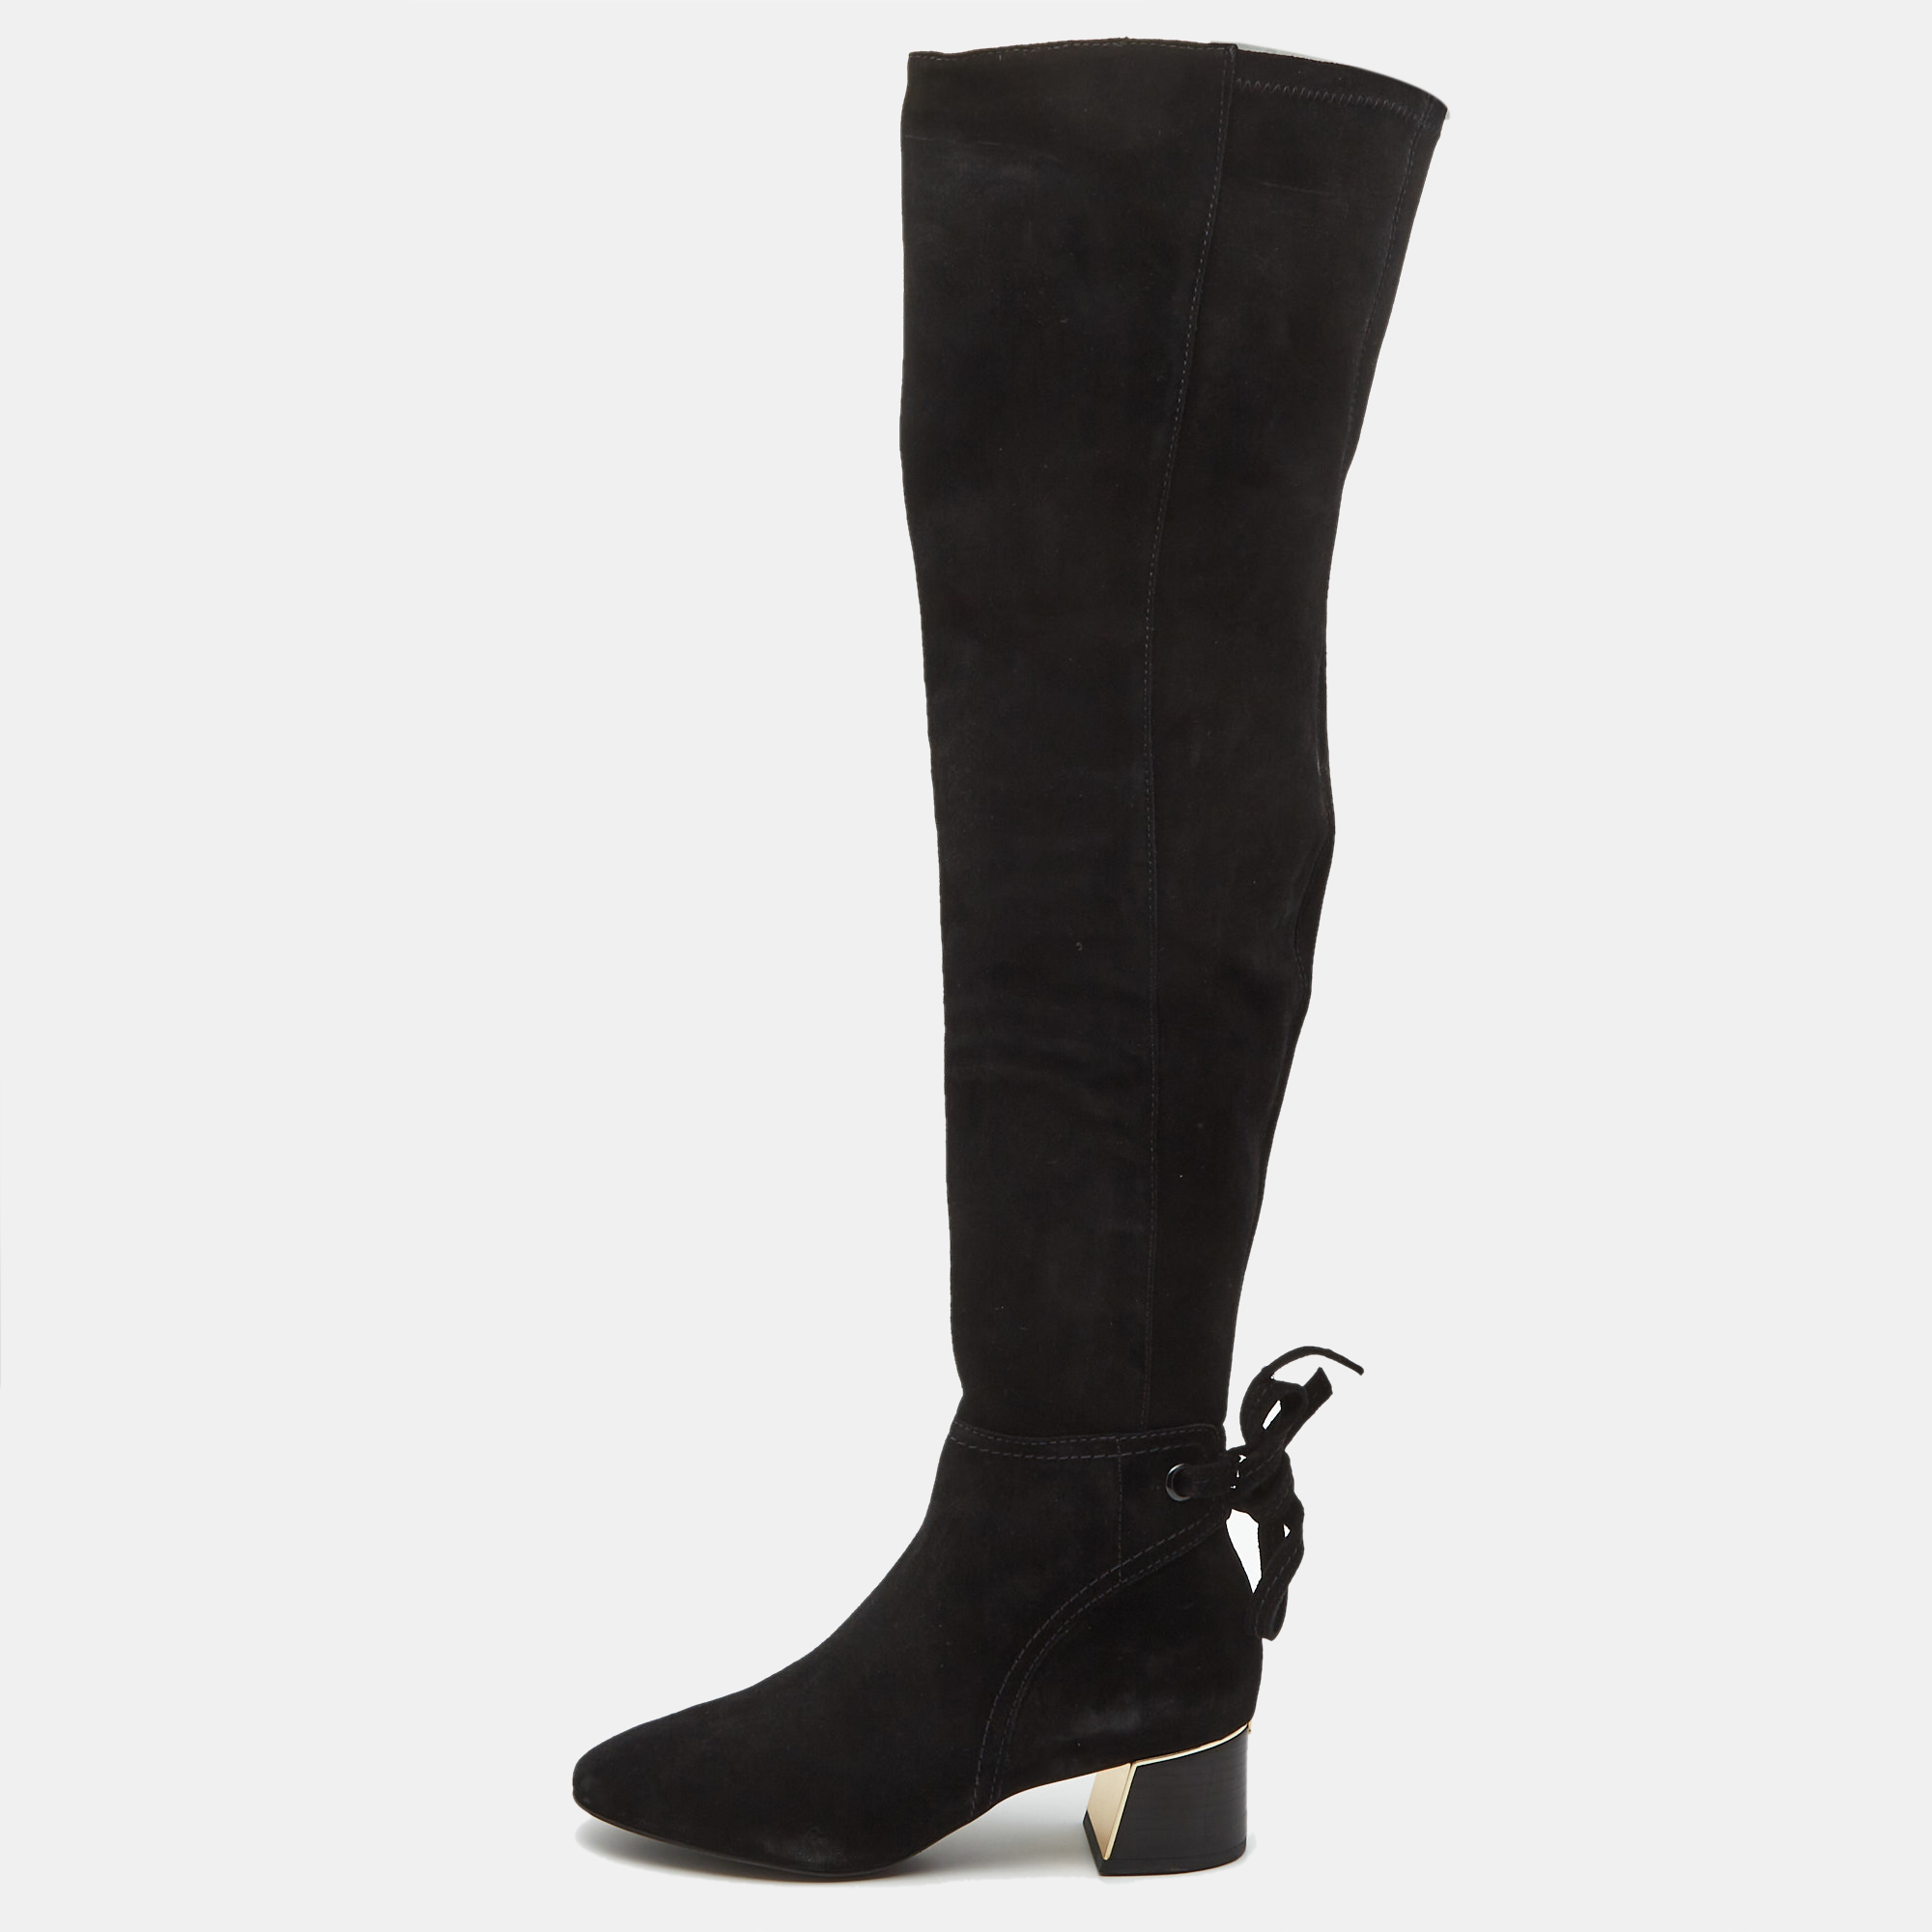 

Tory Burch Black Suede Over The Knee Length Block Heel Boots Size